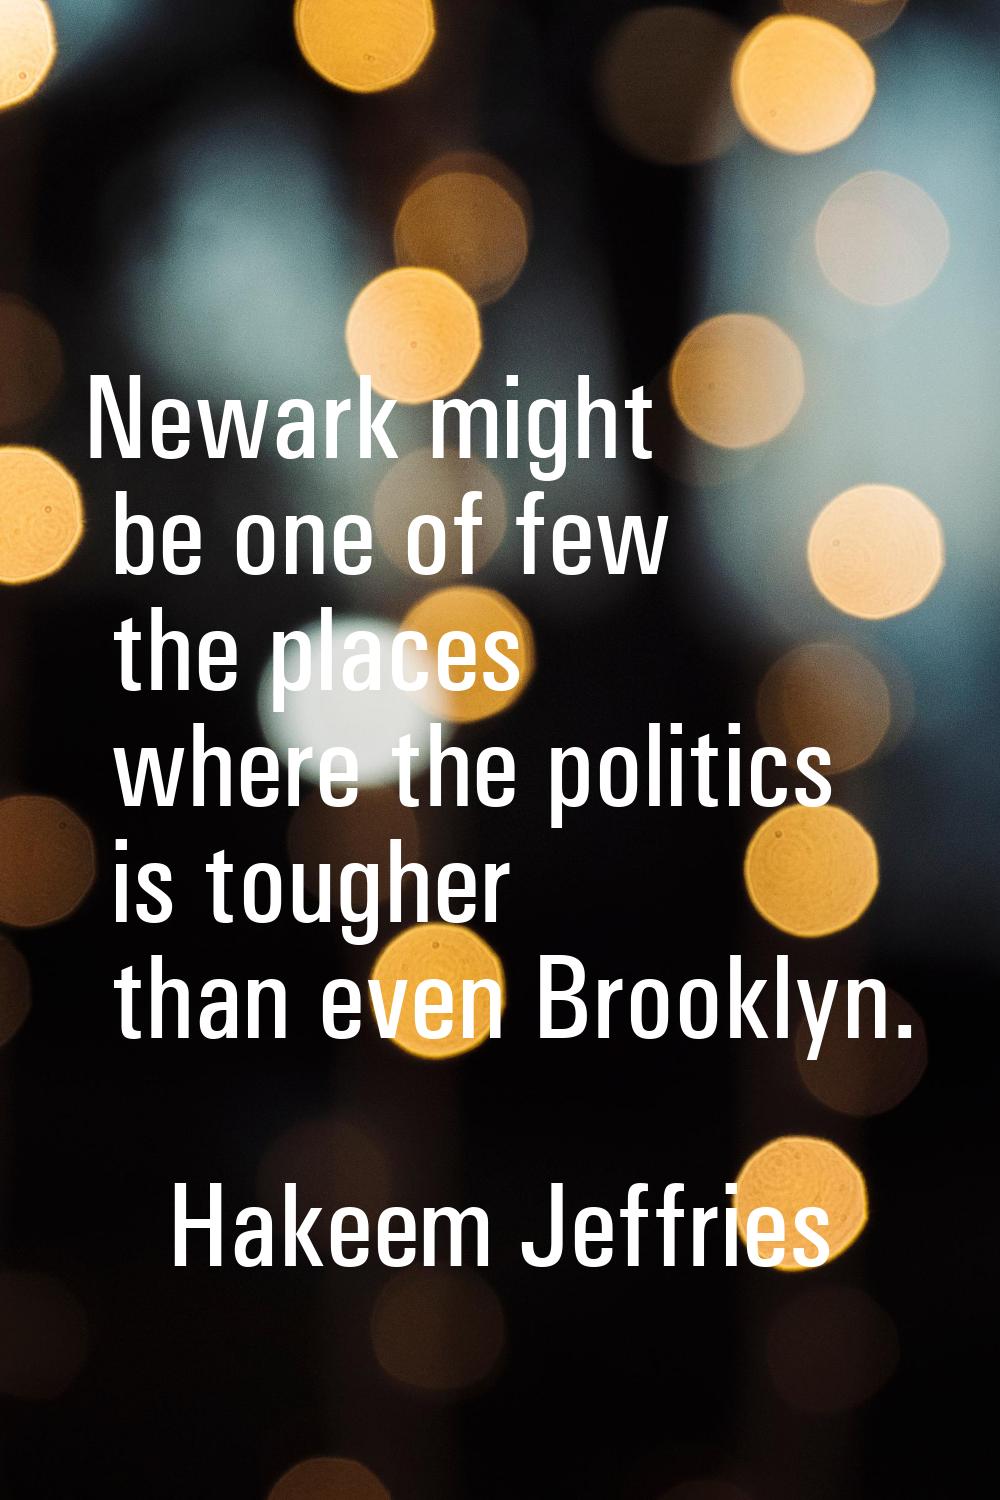 Newark might be one of few the places where the politics is tougher than even Brooklyn.